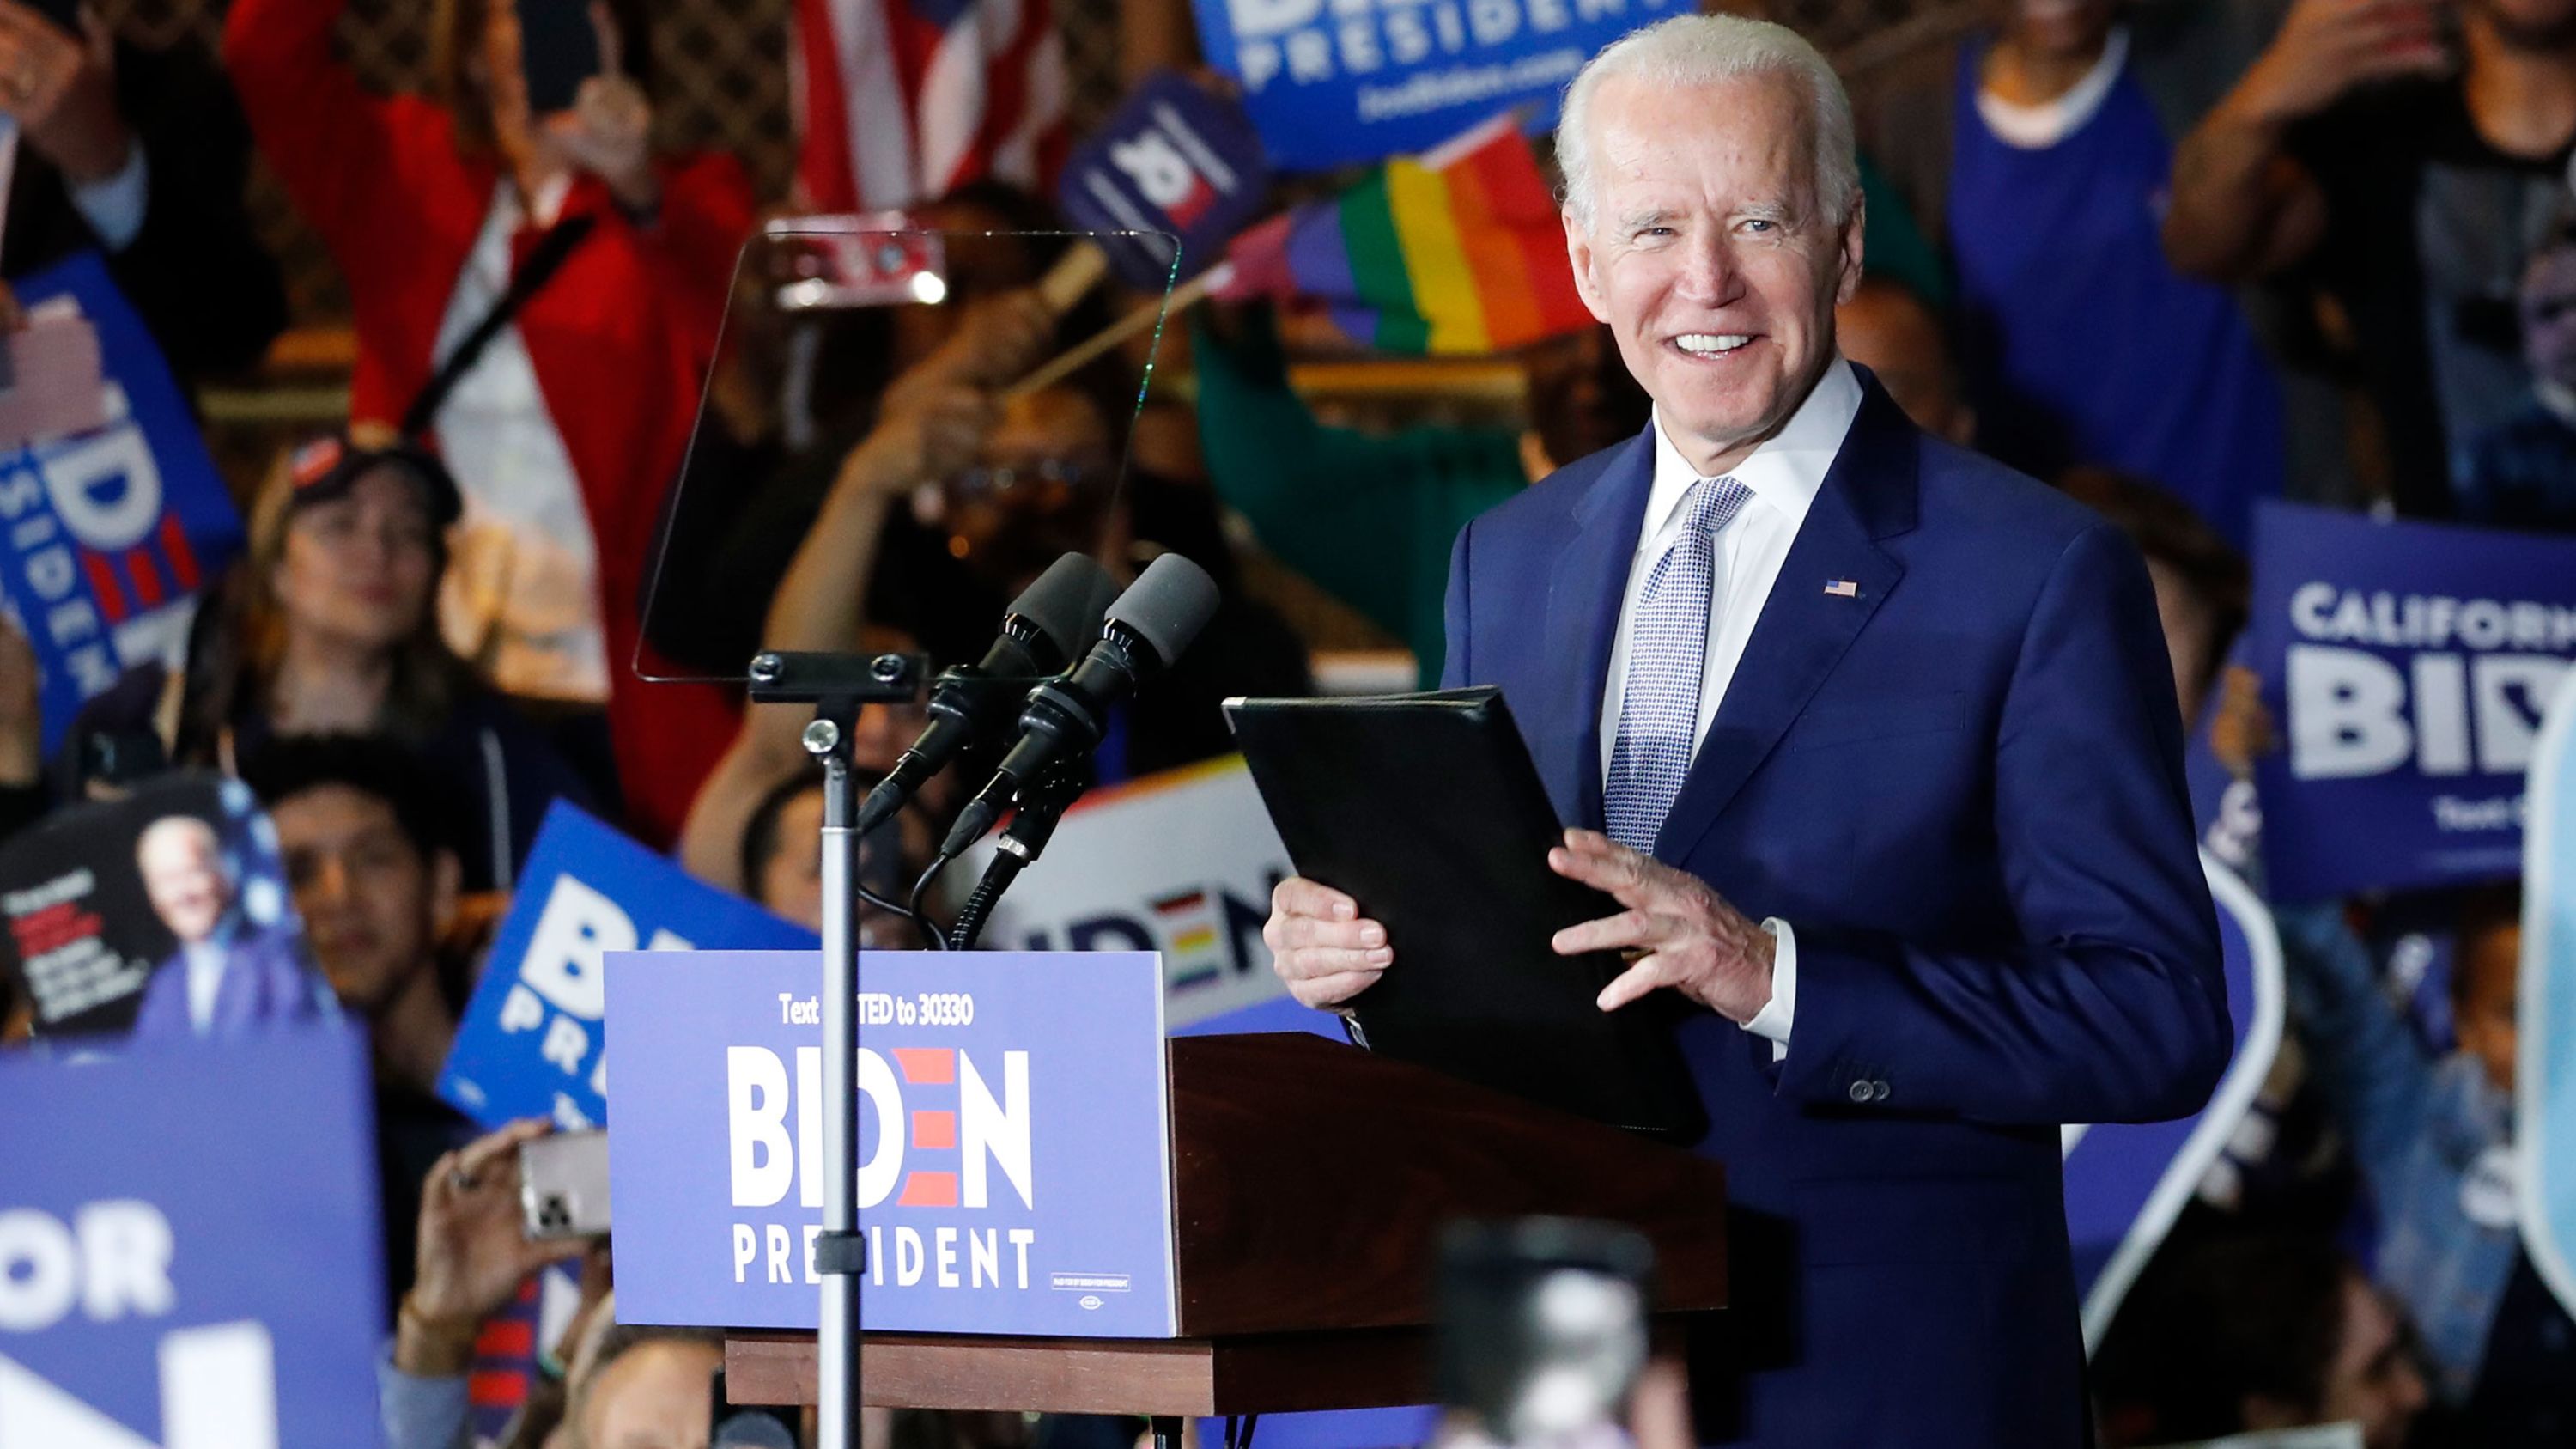 Former Vice President Joe Biden appears at his Super Tuesday rally in Los Angeles on March 3. "It's a good night," <a href="index.php?page=&url=https%3A%2F%2Fwww.cnn.com%2Fpolitics%2Flive-news%2Fsuper-tuesday-results-2020%2Fh_32ccc96bd5b0bd12f55c9f483704fde5" target="_blank">Biden said in his speech.</a> "It seems to be getting better. They don't call it Super Tuesday for nothing."